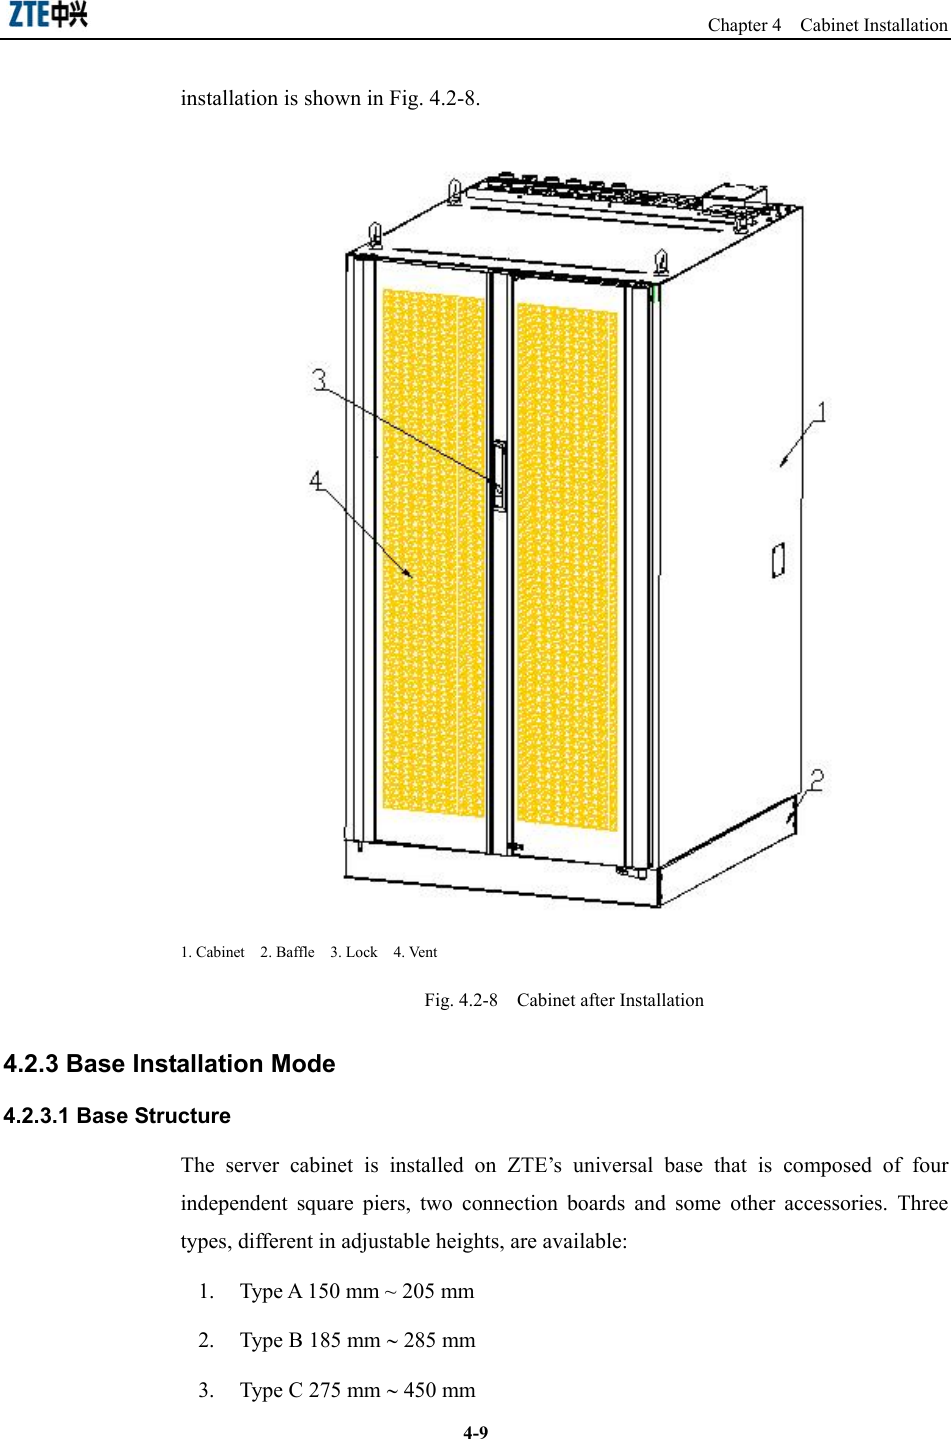                                                                   Chapter 4  Cabinet Installation  4-9installation is shown in Fig. 4.2-8.    1. Cabinet  2. Baffle  3. Lock  4. Vent Fig. 4.2-8    Cabinet after Installation 4.2.3 Base Installation Mode 4.2.3.1 Base Structure The server cabinet is installed on ZTE’s universal base that is composed of four independent square piers, two connection boards and some other accessories. Three types, different in adjustable heights, are available: 1.  Type A 150 mm ~ 205 mm 2.  Type B 185 mm ∼ 285 mm   3.  Type C 275 mm ∼ 450 mm   